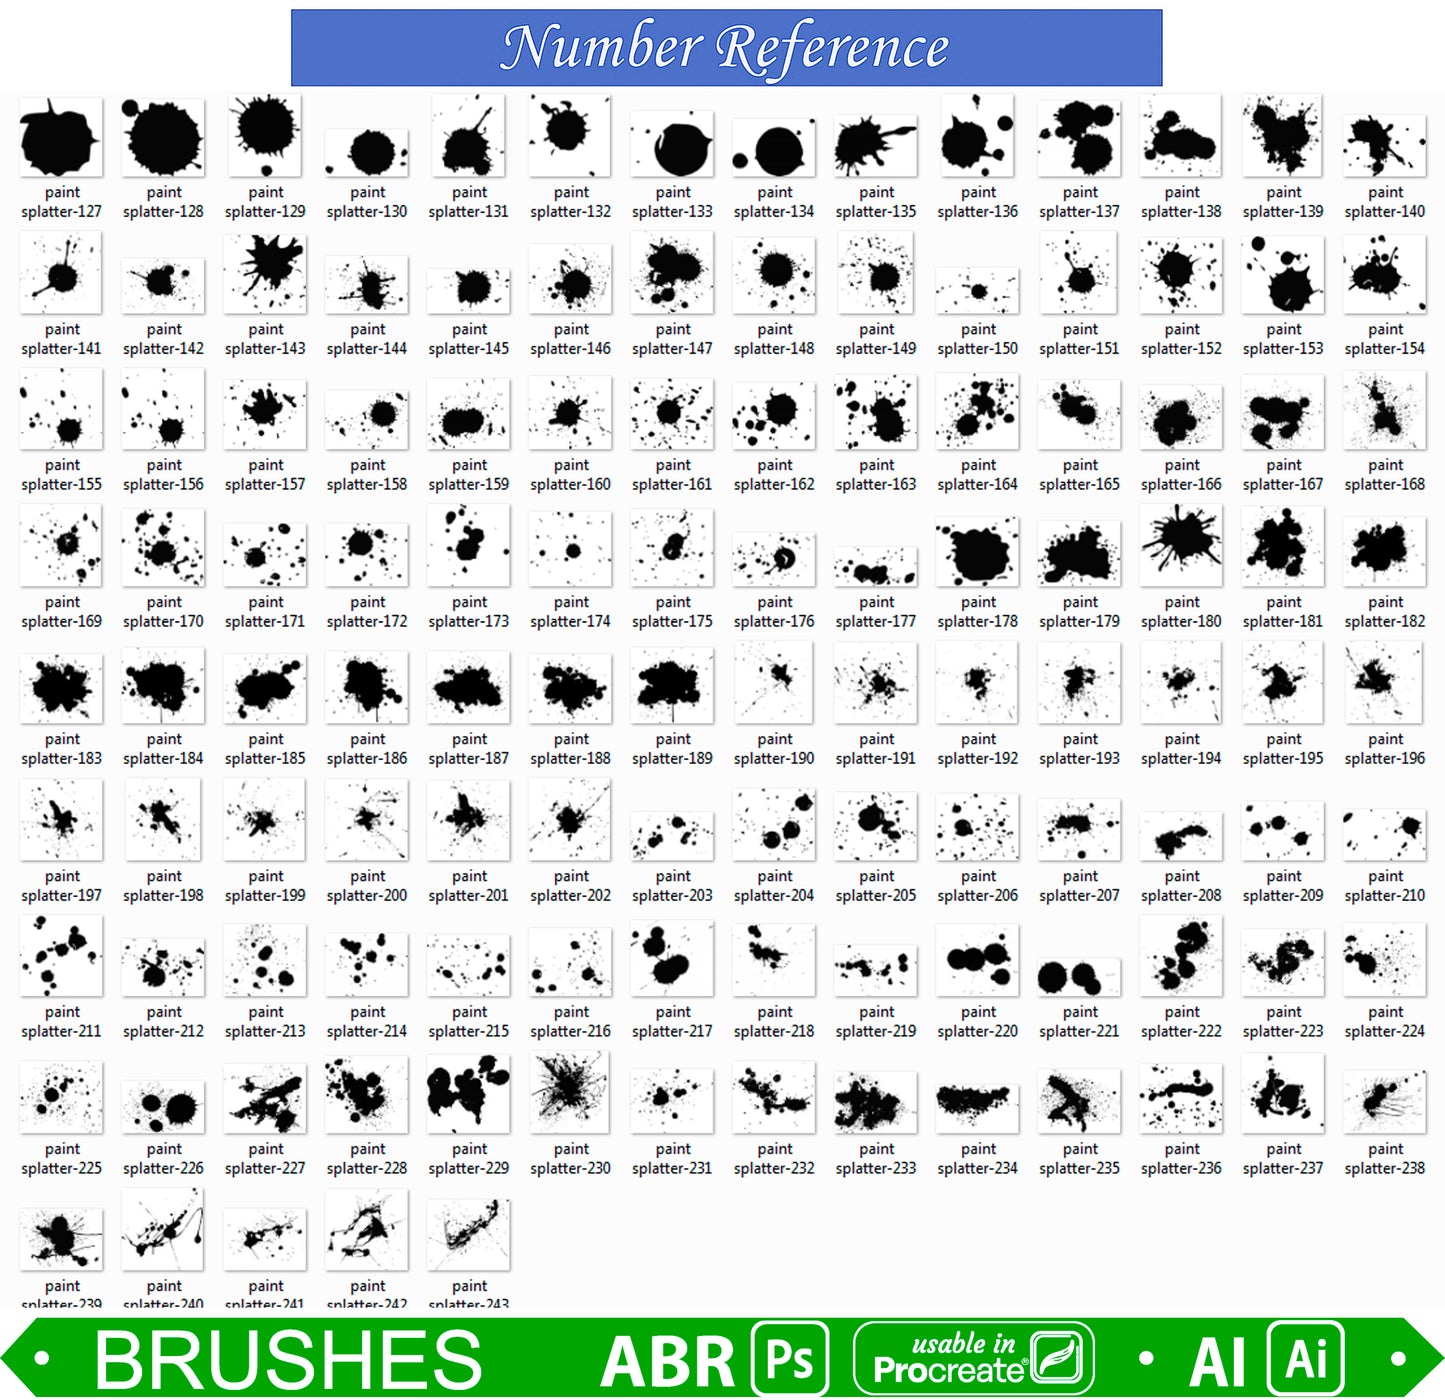 Paint splatter brush stamps for Photoshop ( Usable in Procreate 5 ) and Illustrator